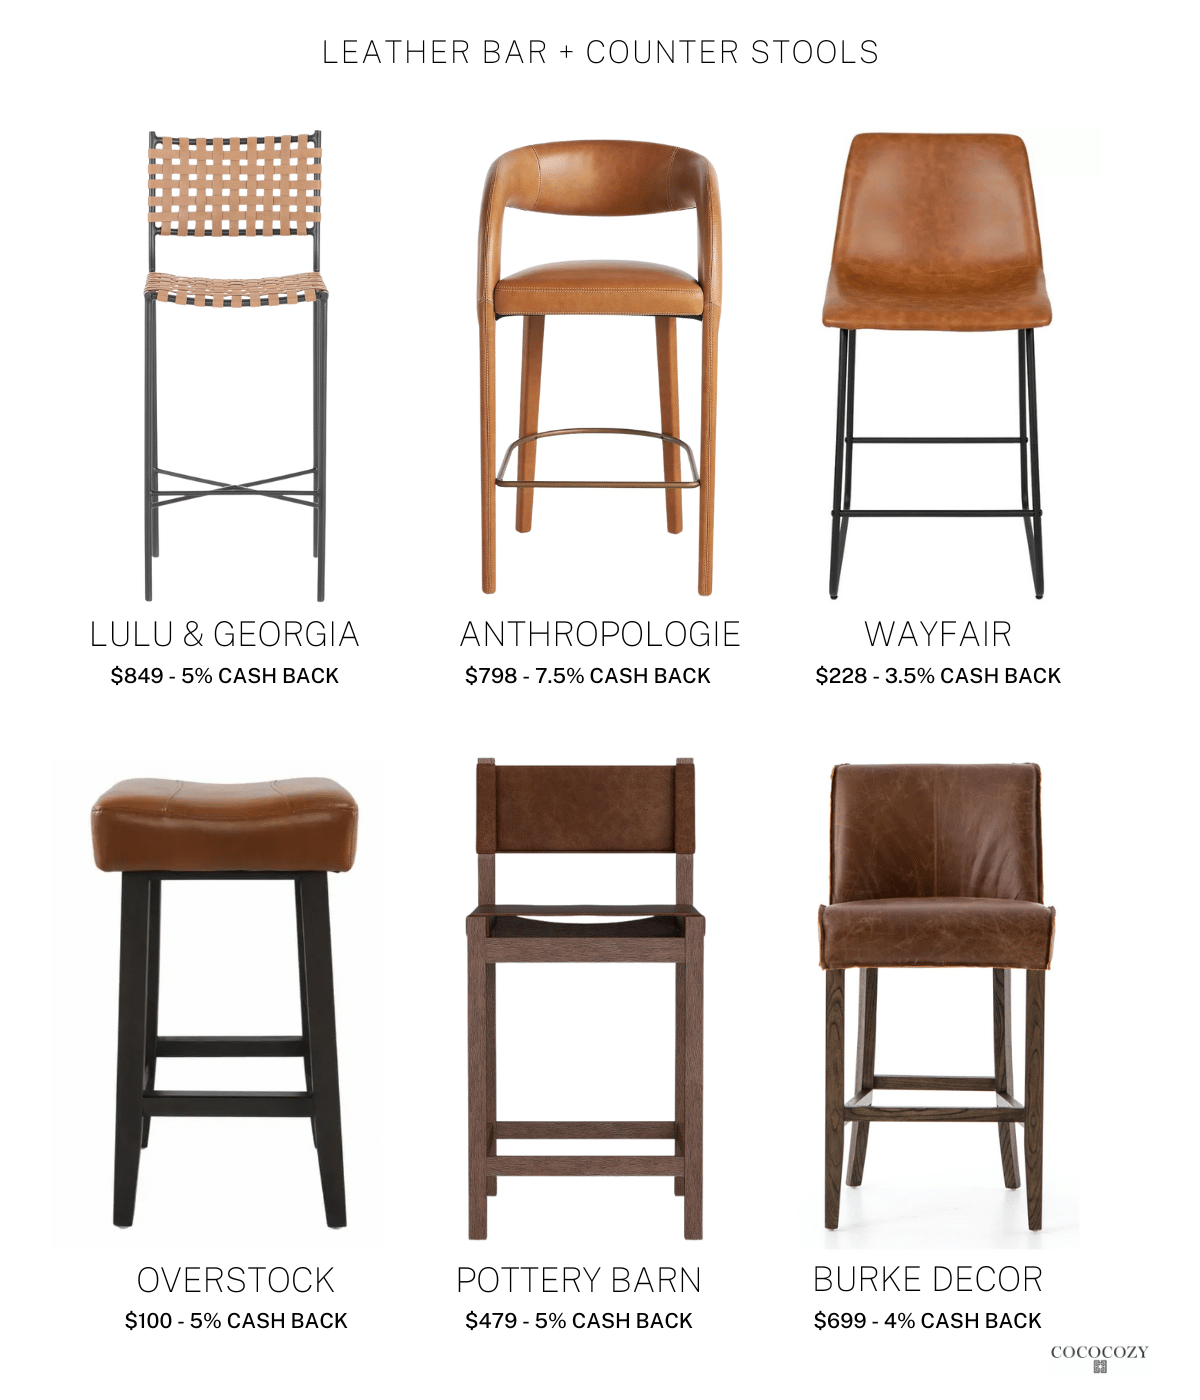 Alt tag for bar-stools-leather-counter-stools-cococozy